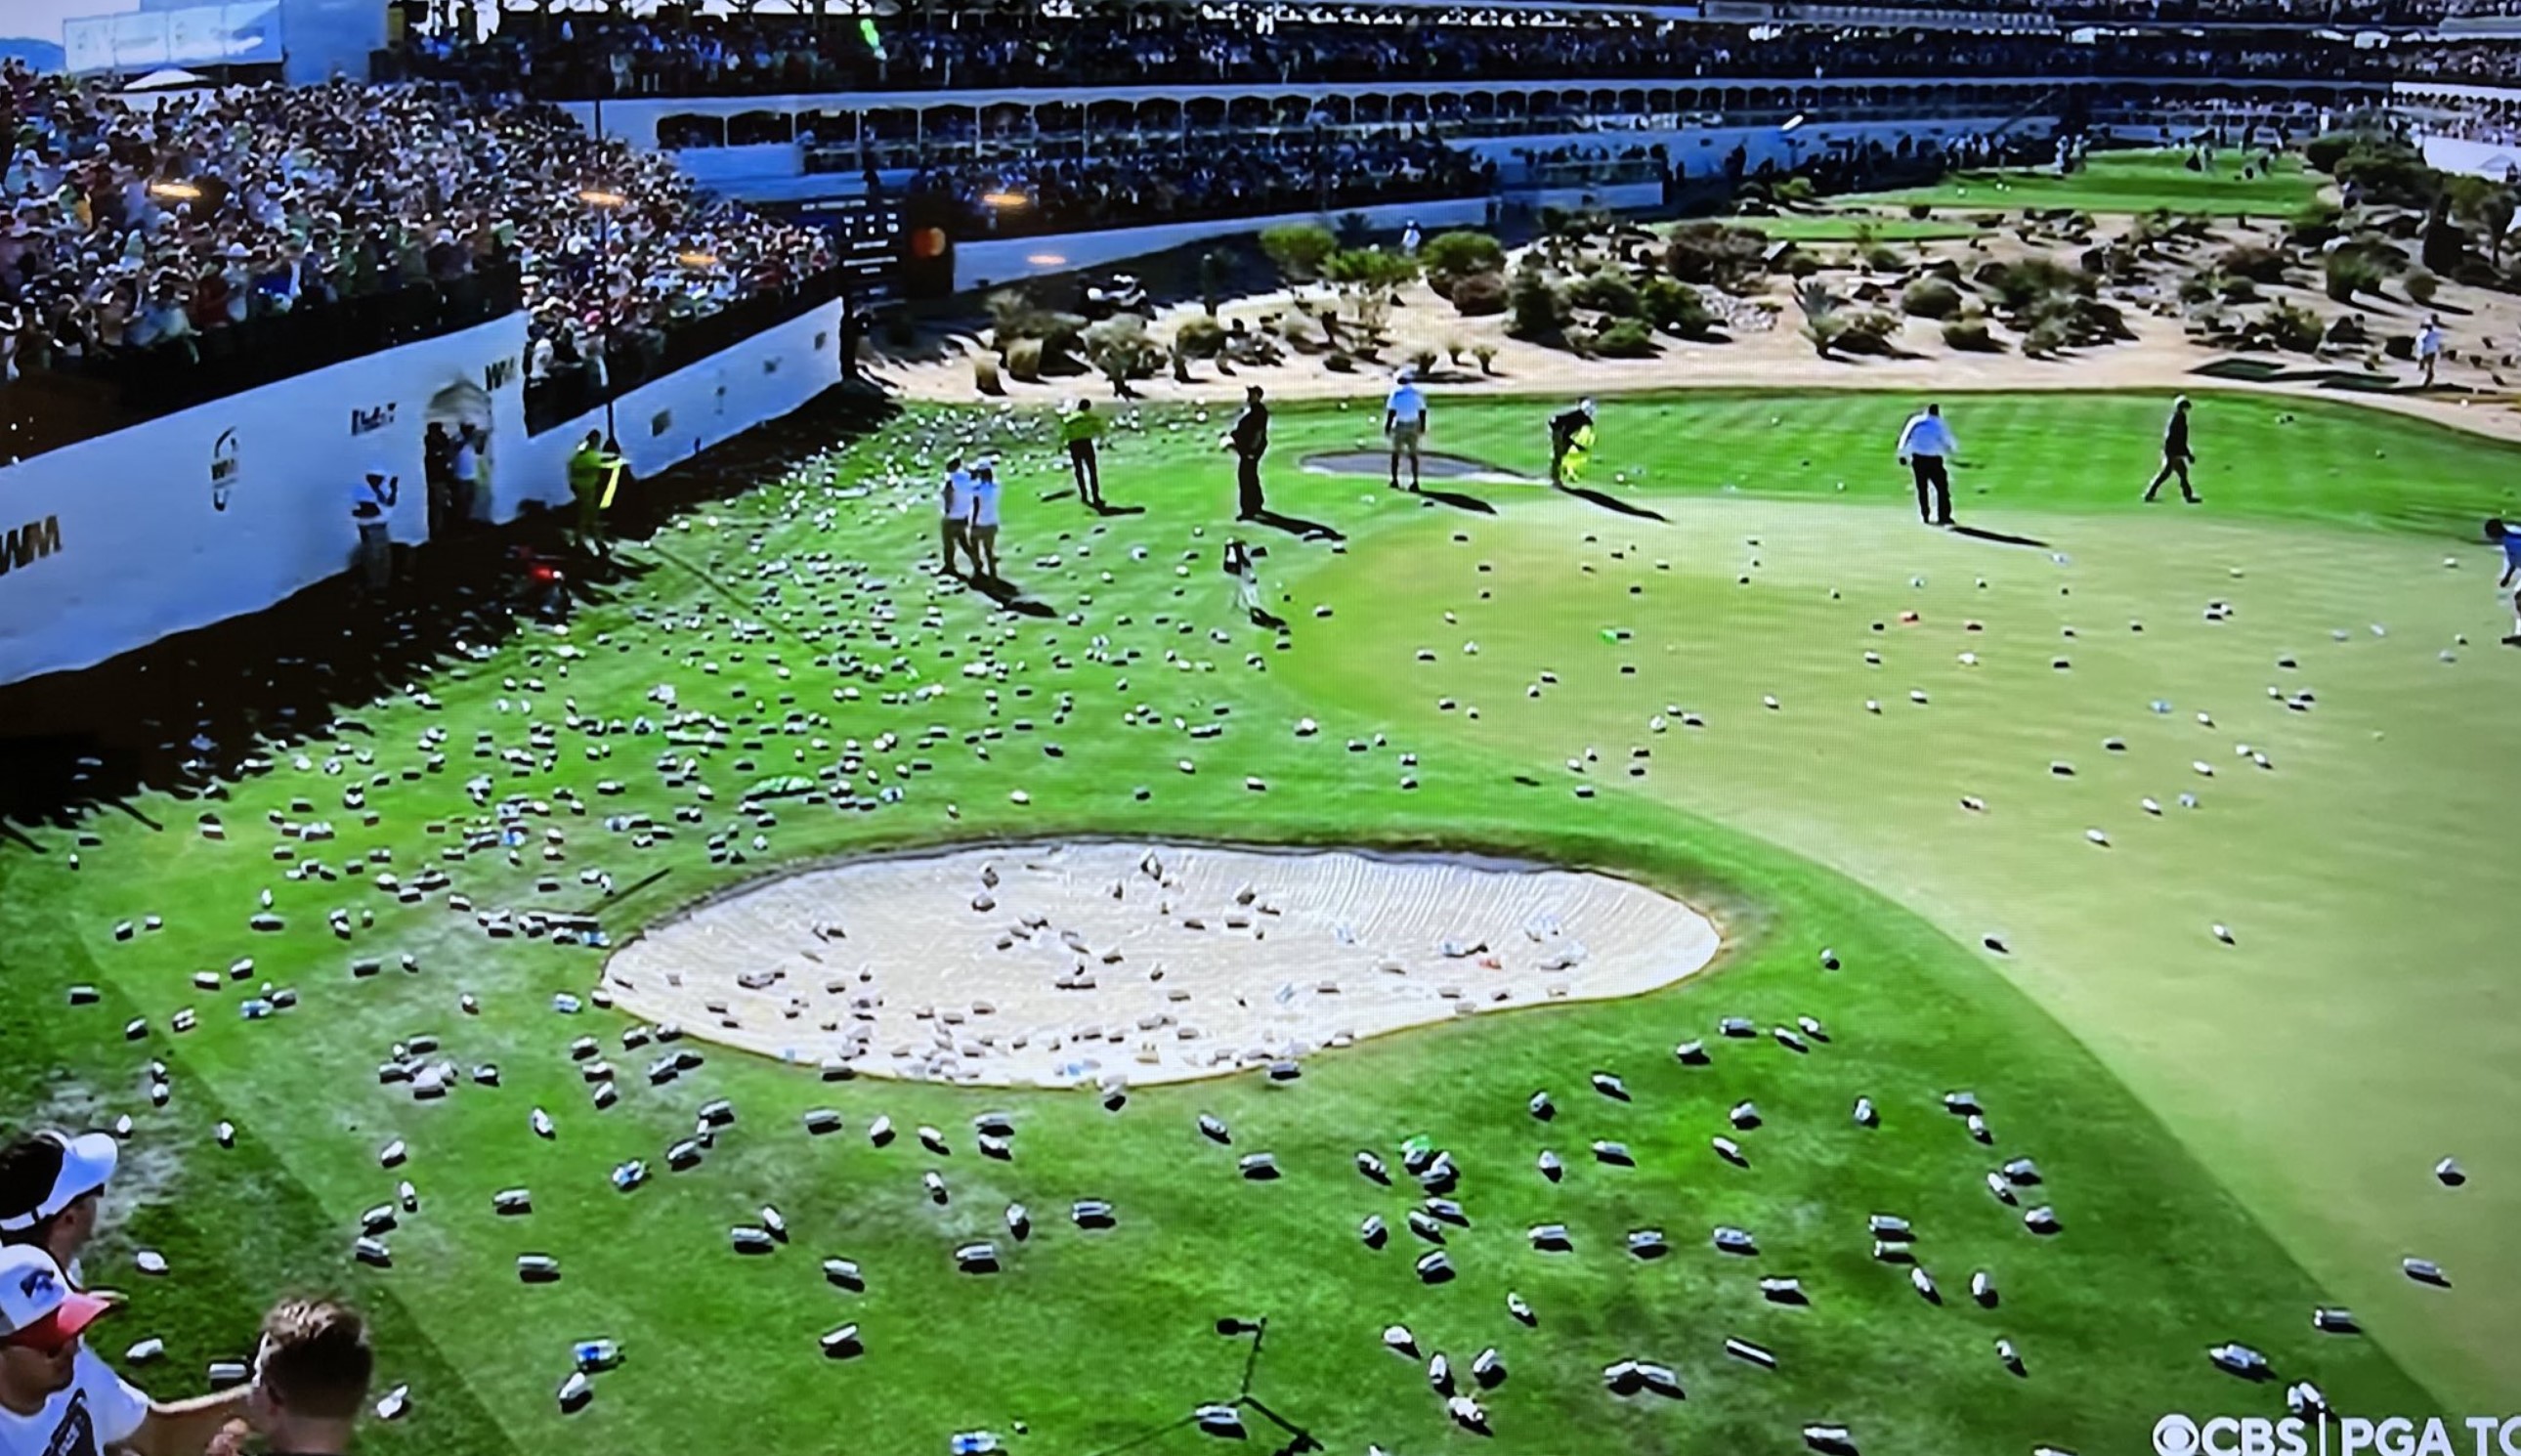 WATCH Scottsdale Fans Cover 16th Green In Beer Cans After Hole-In-One Golf Monthly